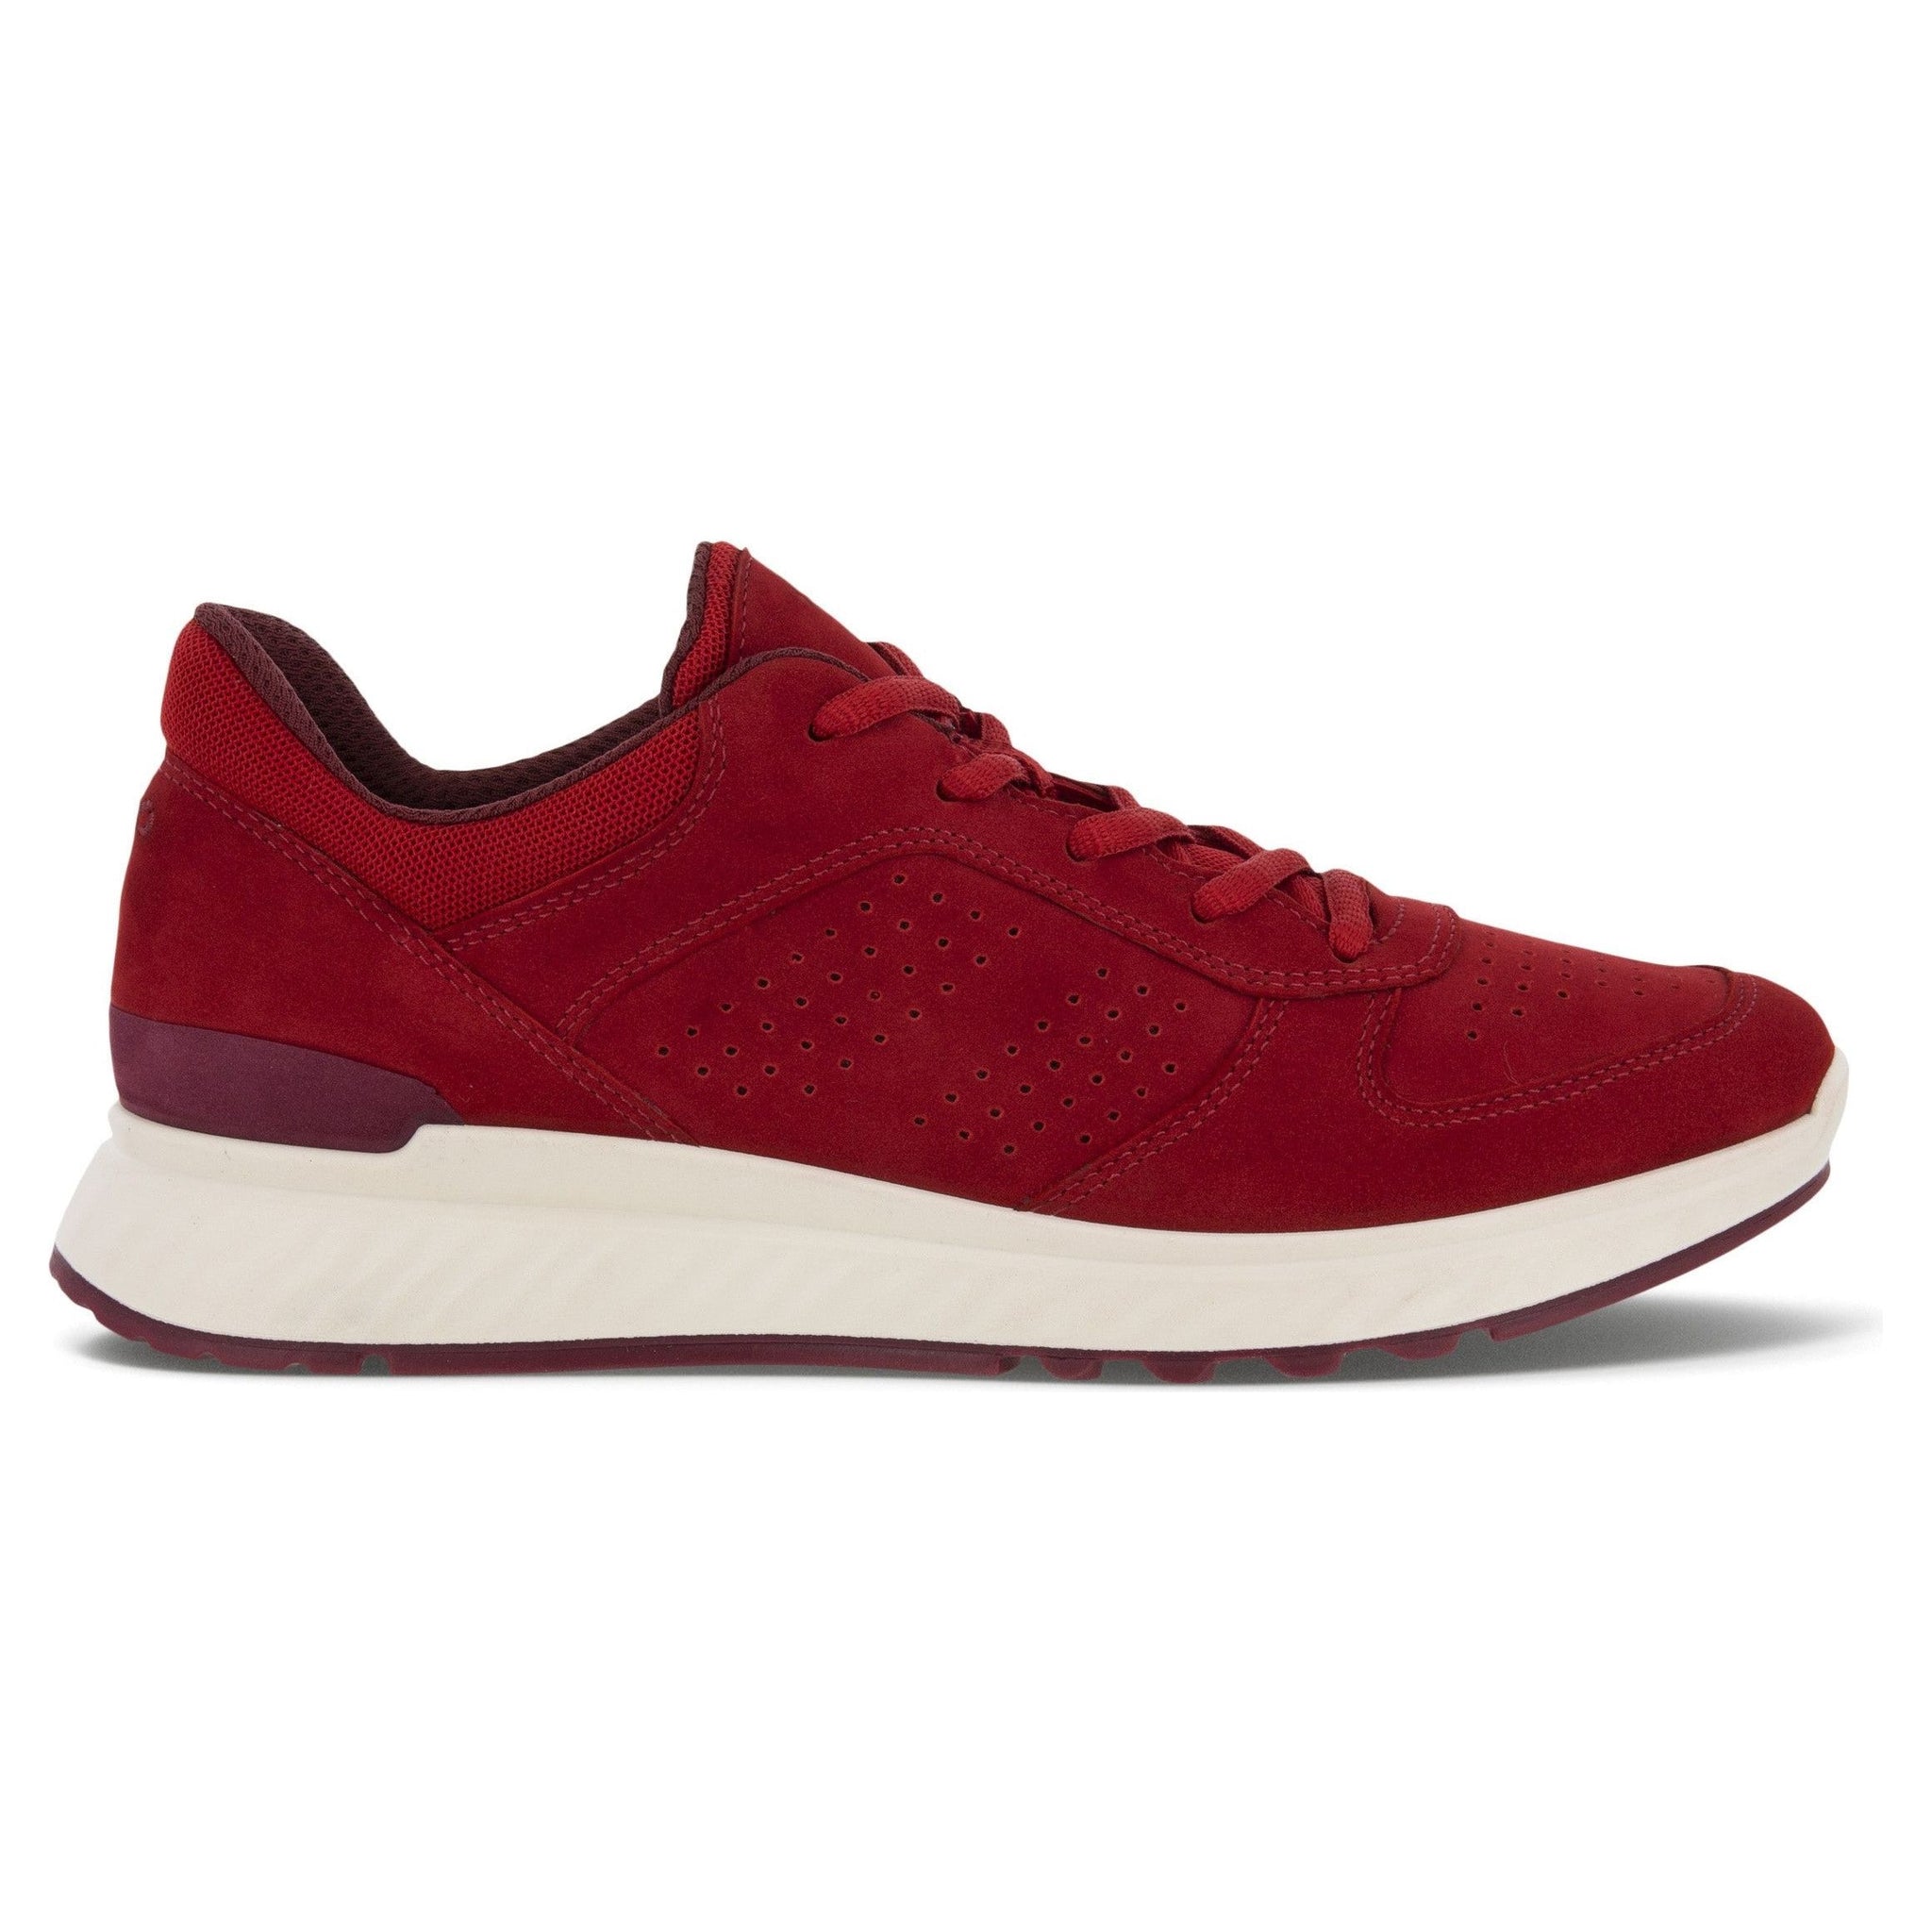 ECCO Exostrike  (835313) - Ladies Lace Trainer in Chilli Red. ECCO Shoes l Wisemans | Bantry | West Cork | Ireland